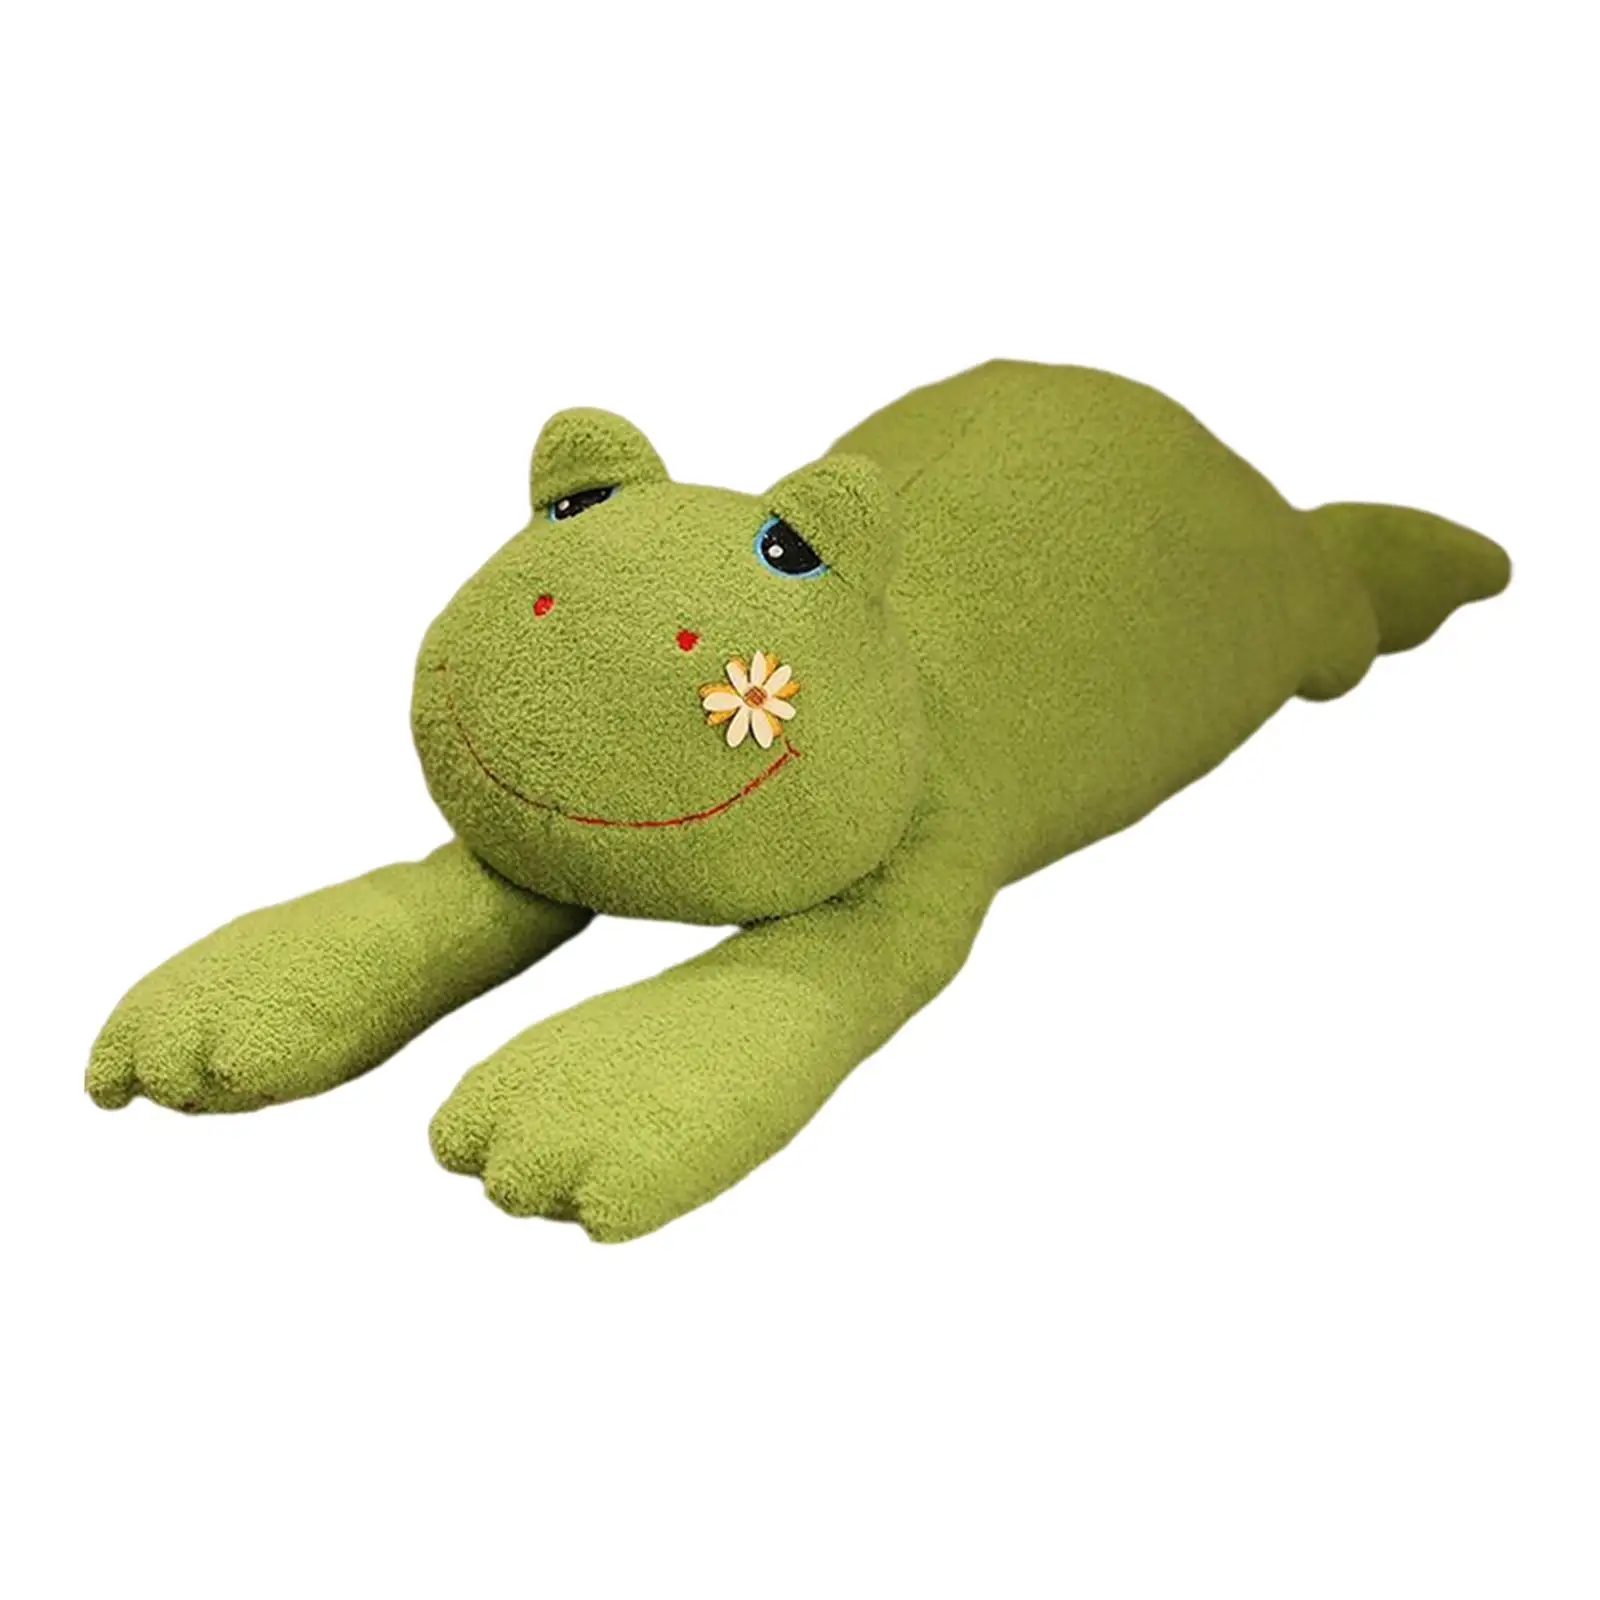 Adorable Frog Plush Toy Pillow Home Decoration Soft Stuffed Animal for Party Sofa Decor Birthday Gifts Toddlers Children